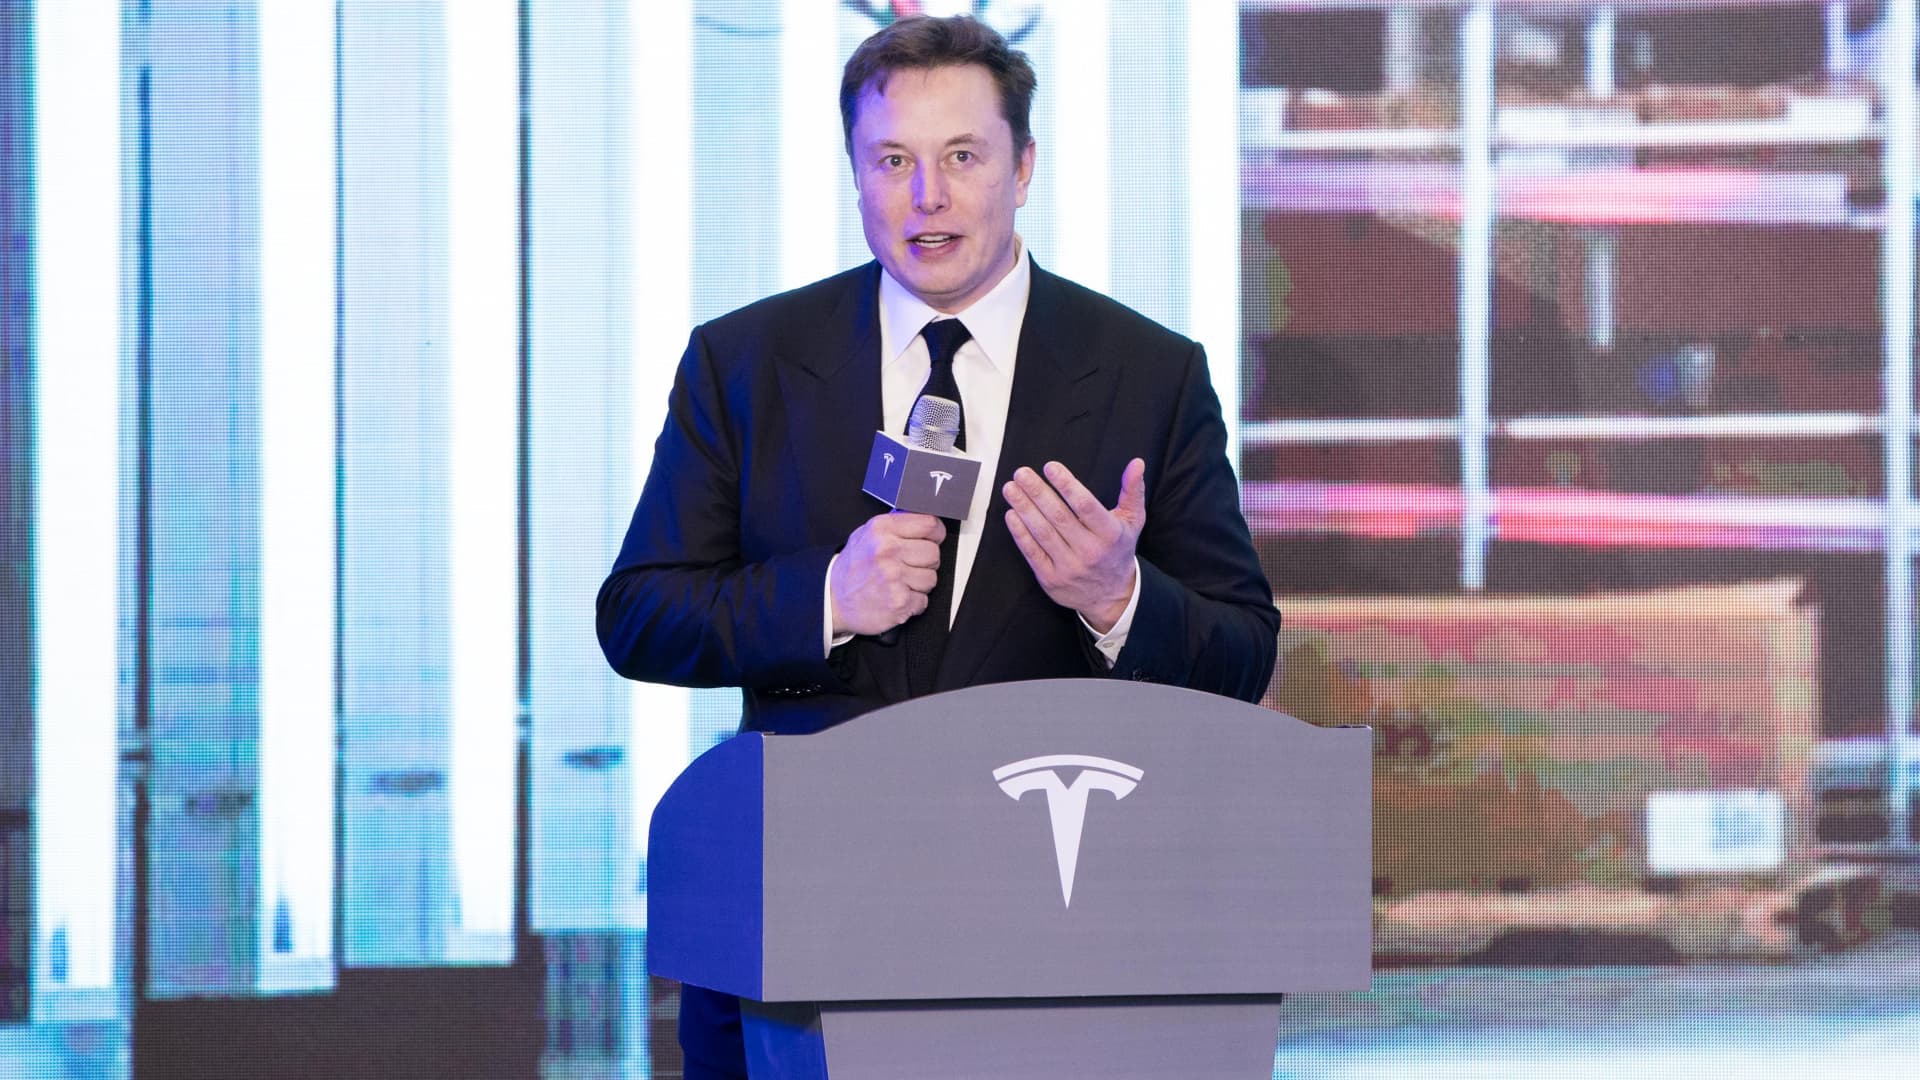 Elon Musk says a Chinese automaker will likely be second to Tesla: ‘They work the smartest’